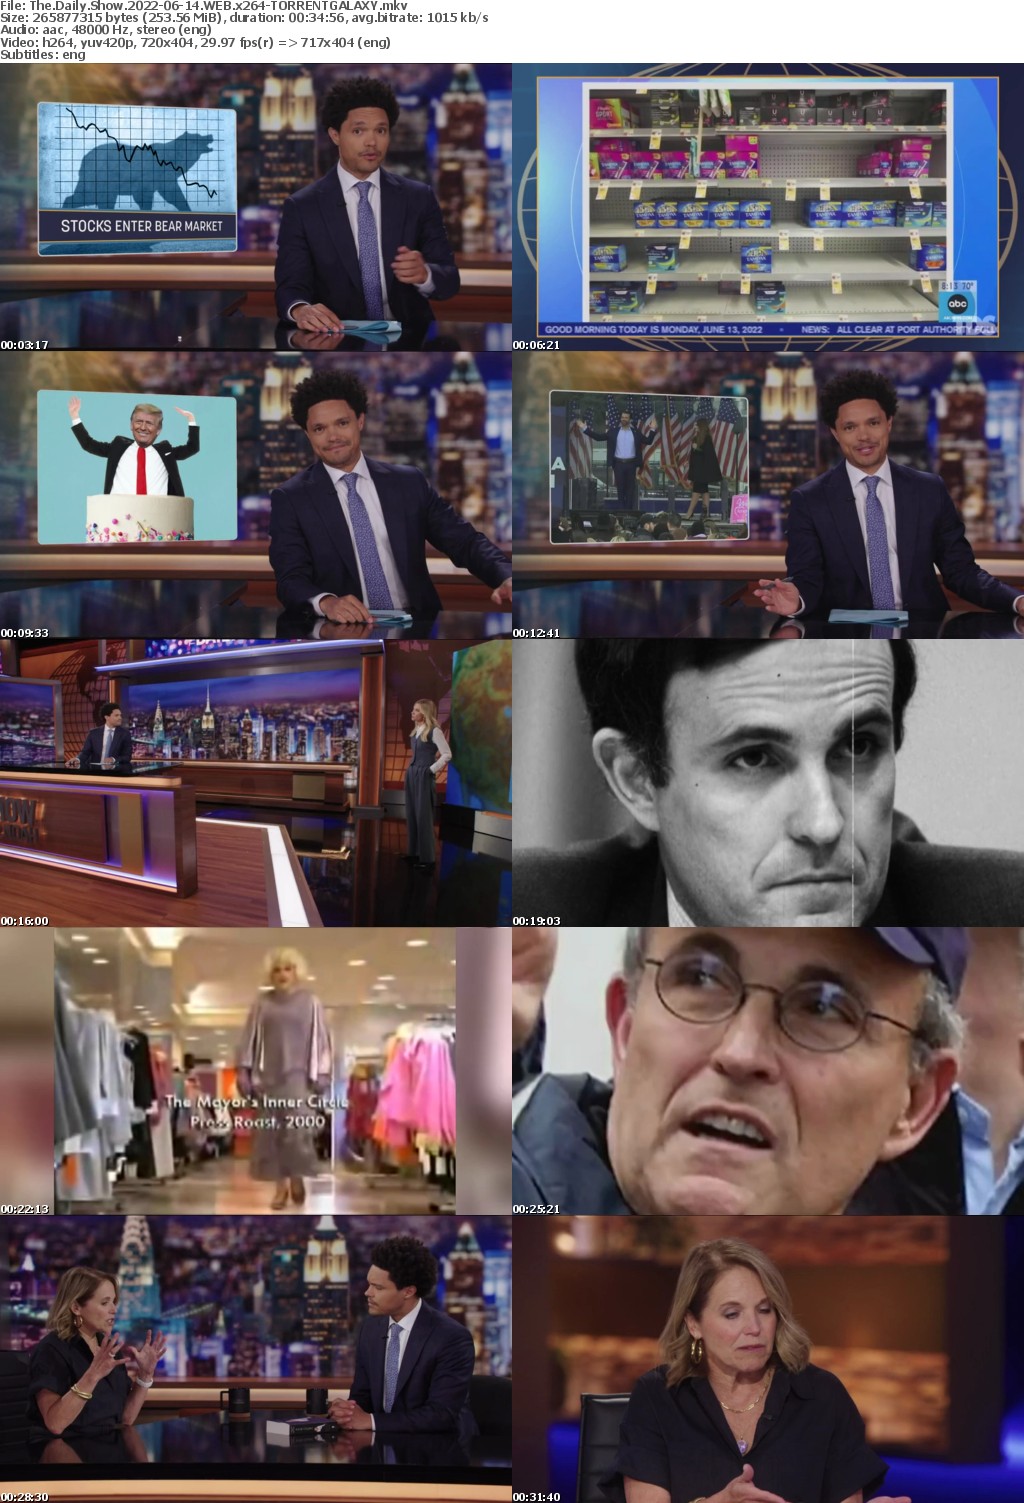 The Daily Show 2022-06-14 WEB x264-GALAXY